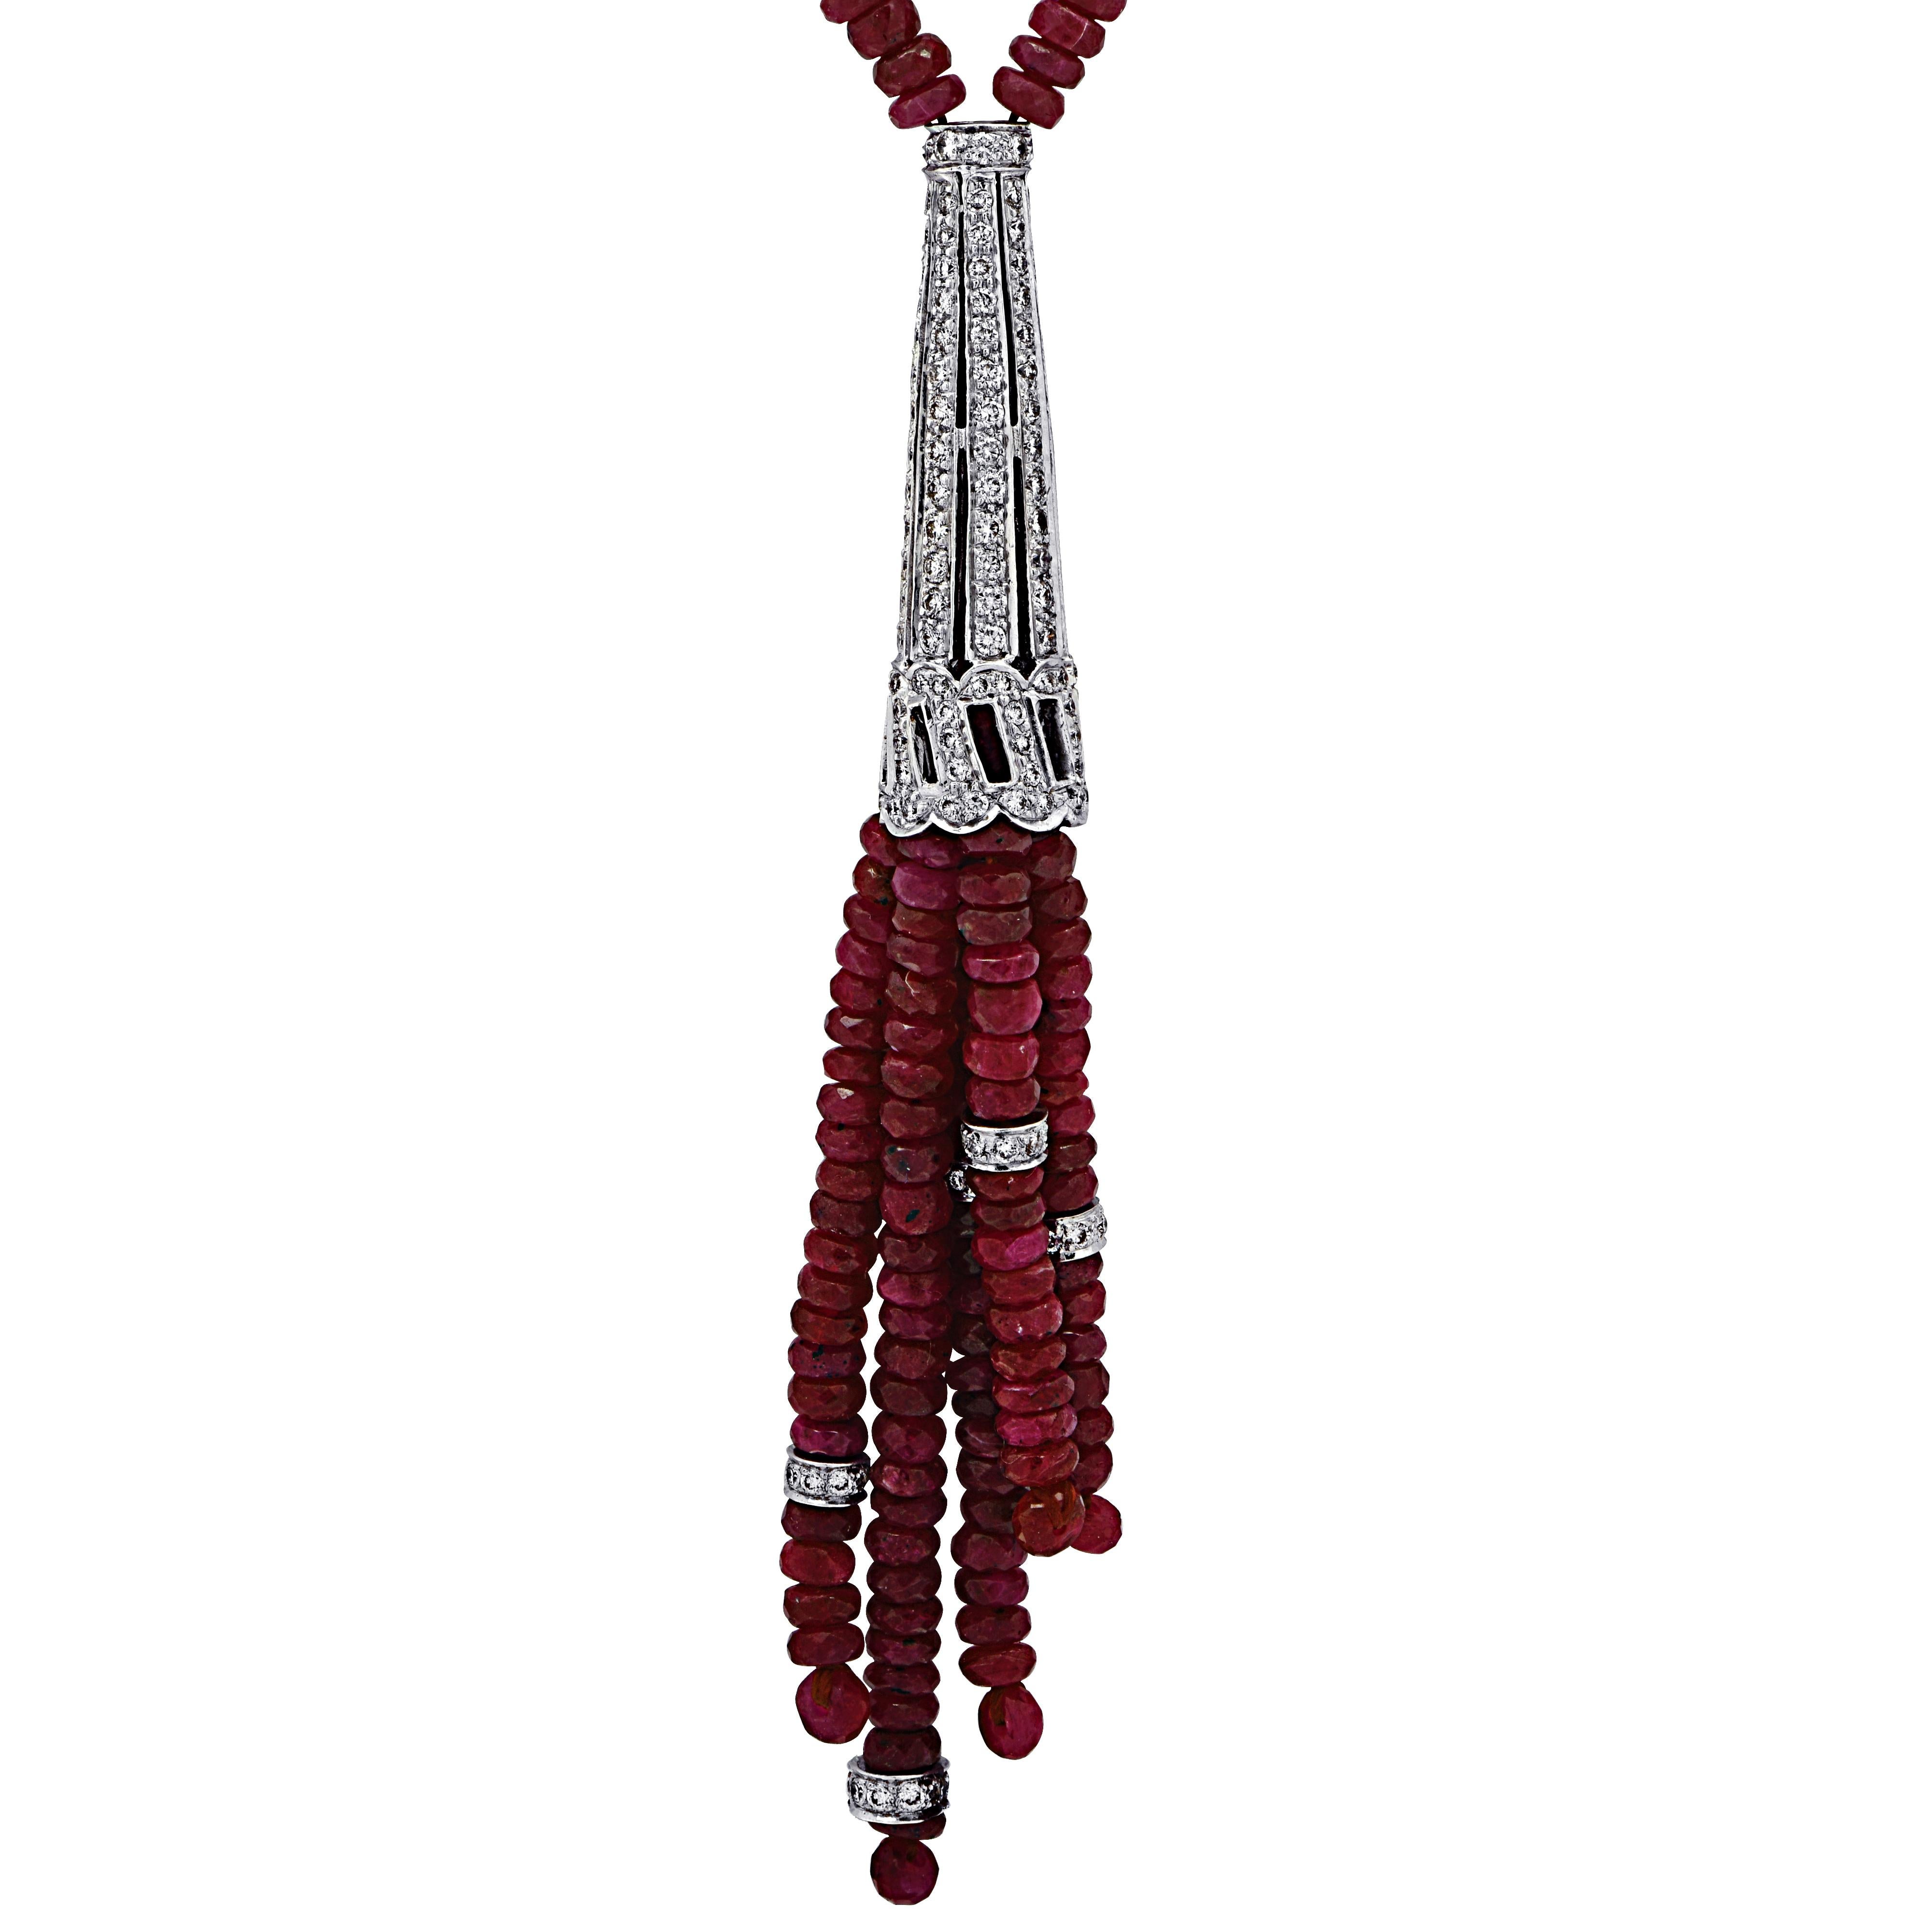 Stunning ruby and diamond tassel necklace featuring ruby briolettes accented with 223 round brilliant cut diamonds weighing approximately 3 carats total, G color, SI clarity, set in platinum. The deep hue of the rubies are accentuated by the crisp